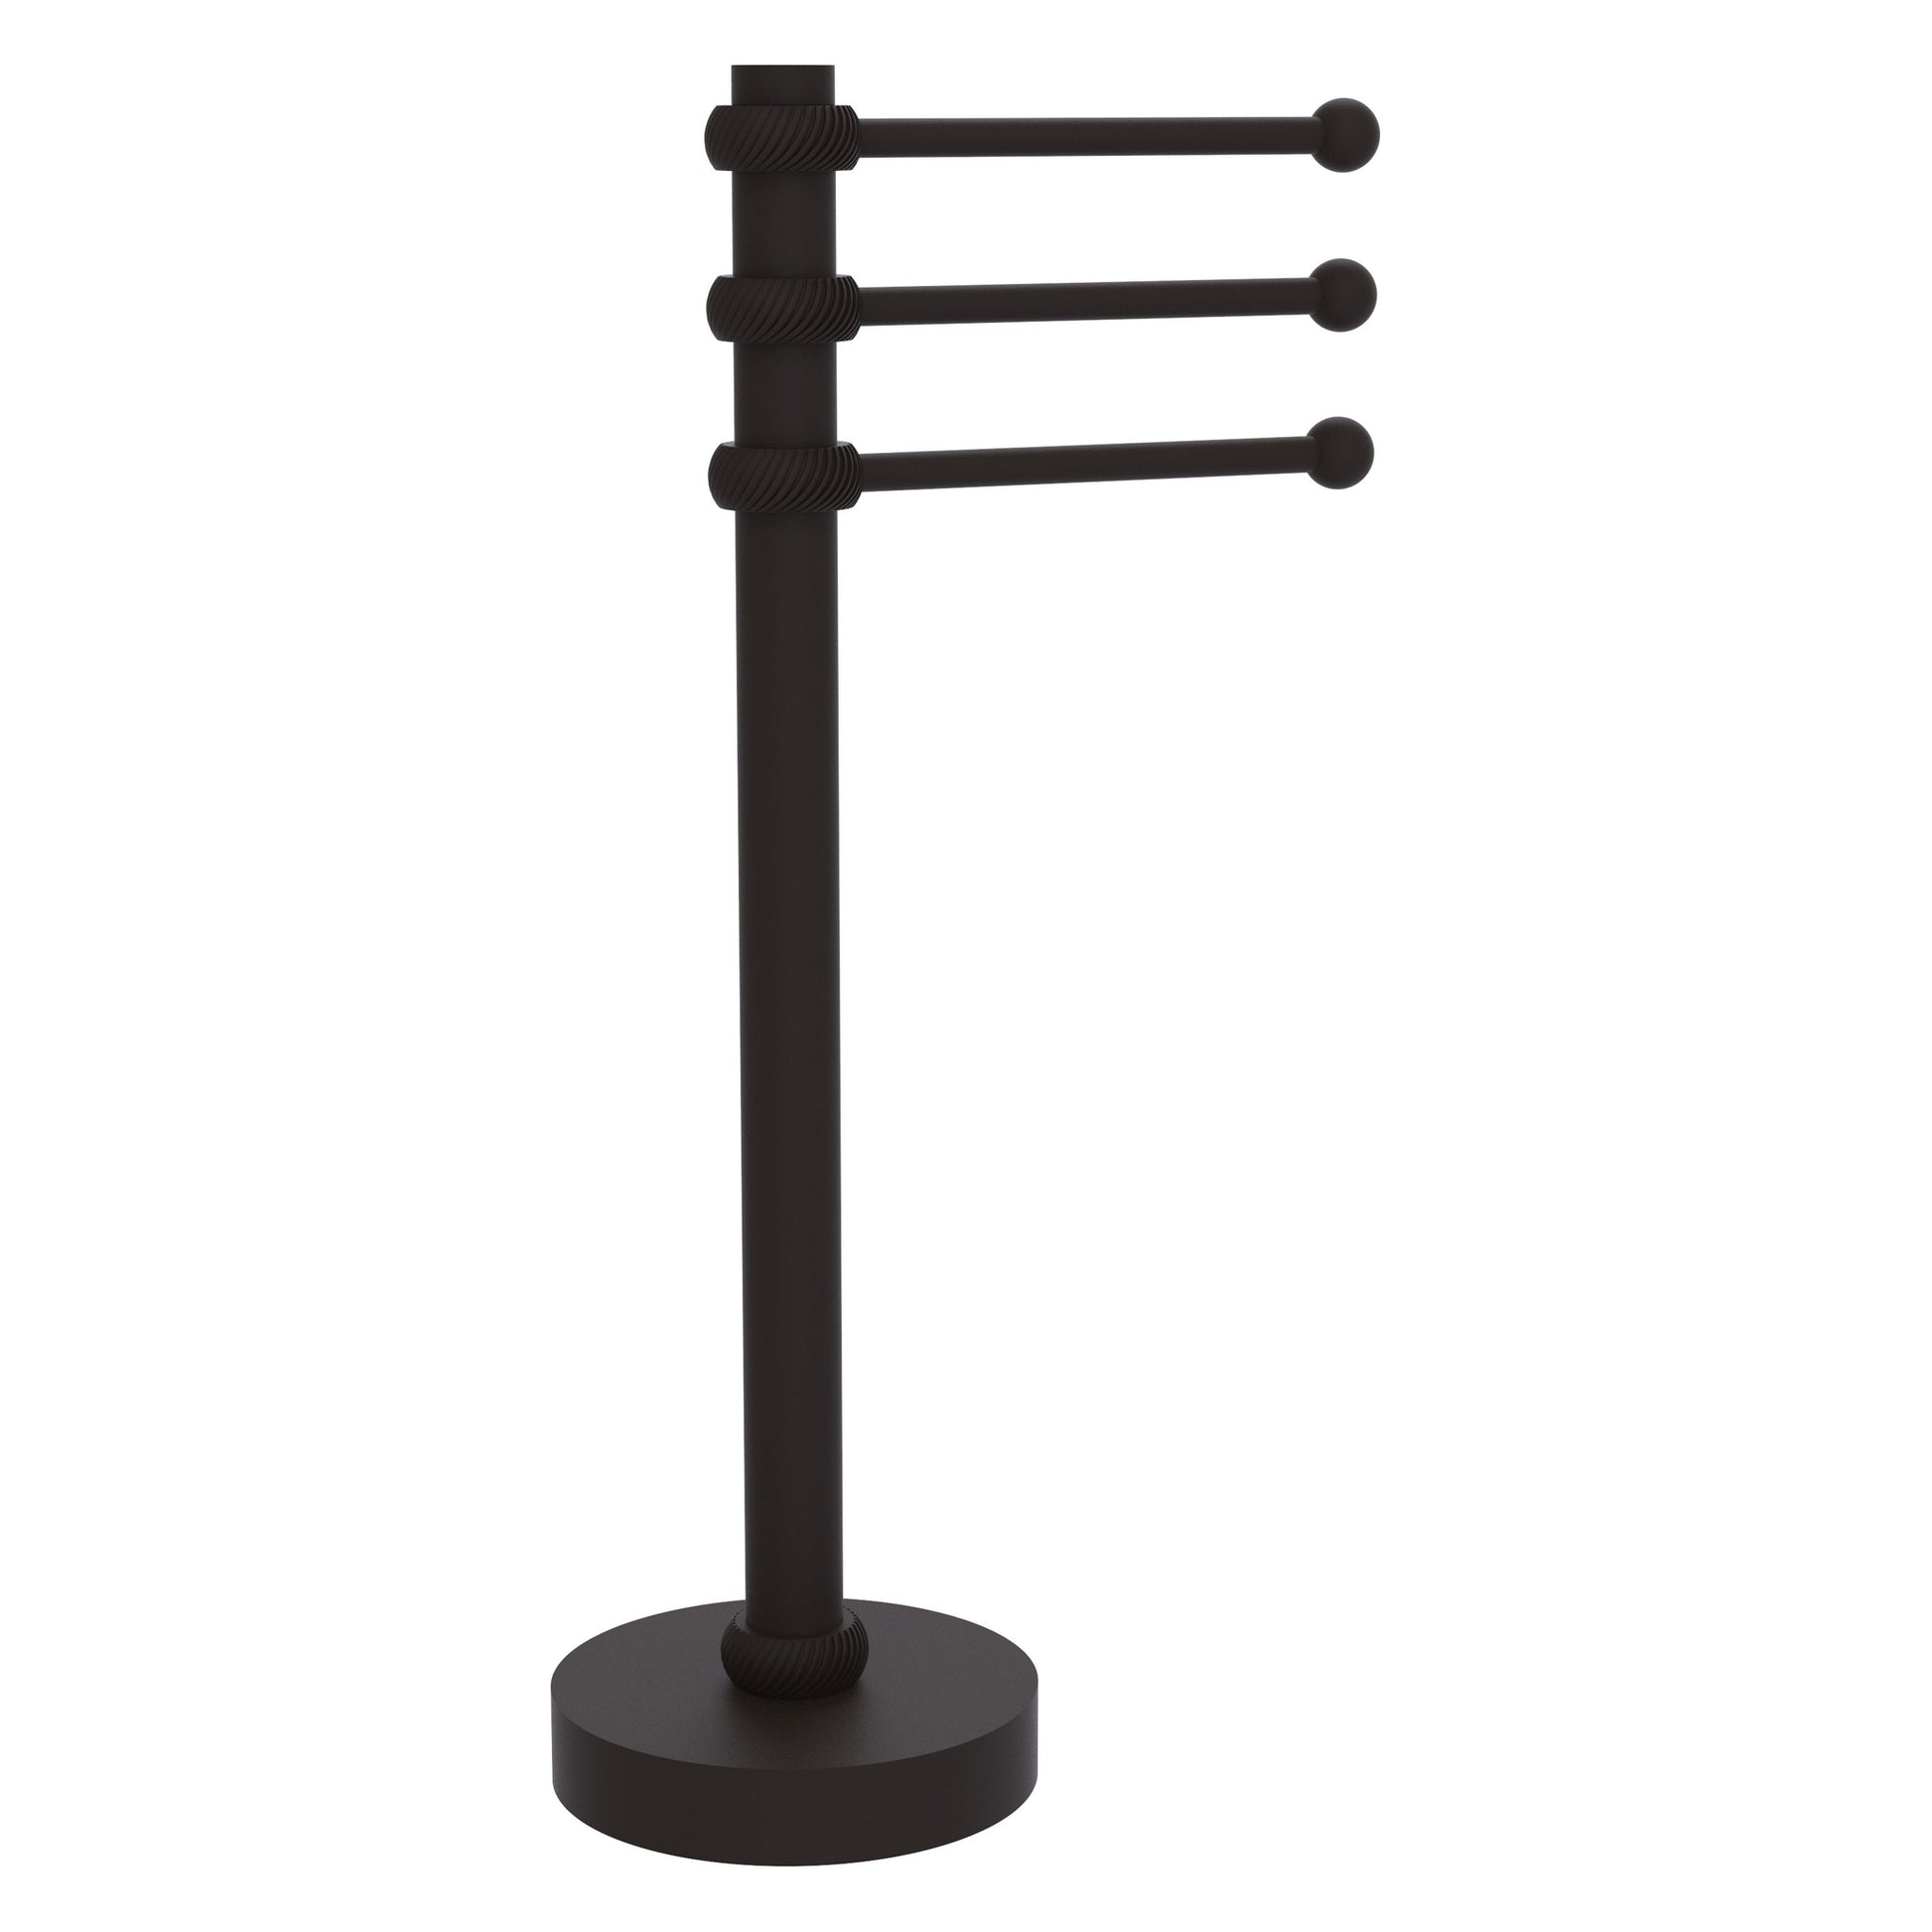 https://usbathstore.com/cdn/shop/files/Allied-Brass-973T-9-x-8-Oil-Rubbed-Bronze-Solid-Brass-Vanity-Top-3-Swing-Arm-Guest-Towel-Holder-With-Twisted-Accents.jpg?v=1688053047&width=1946